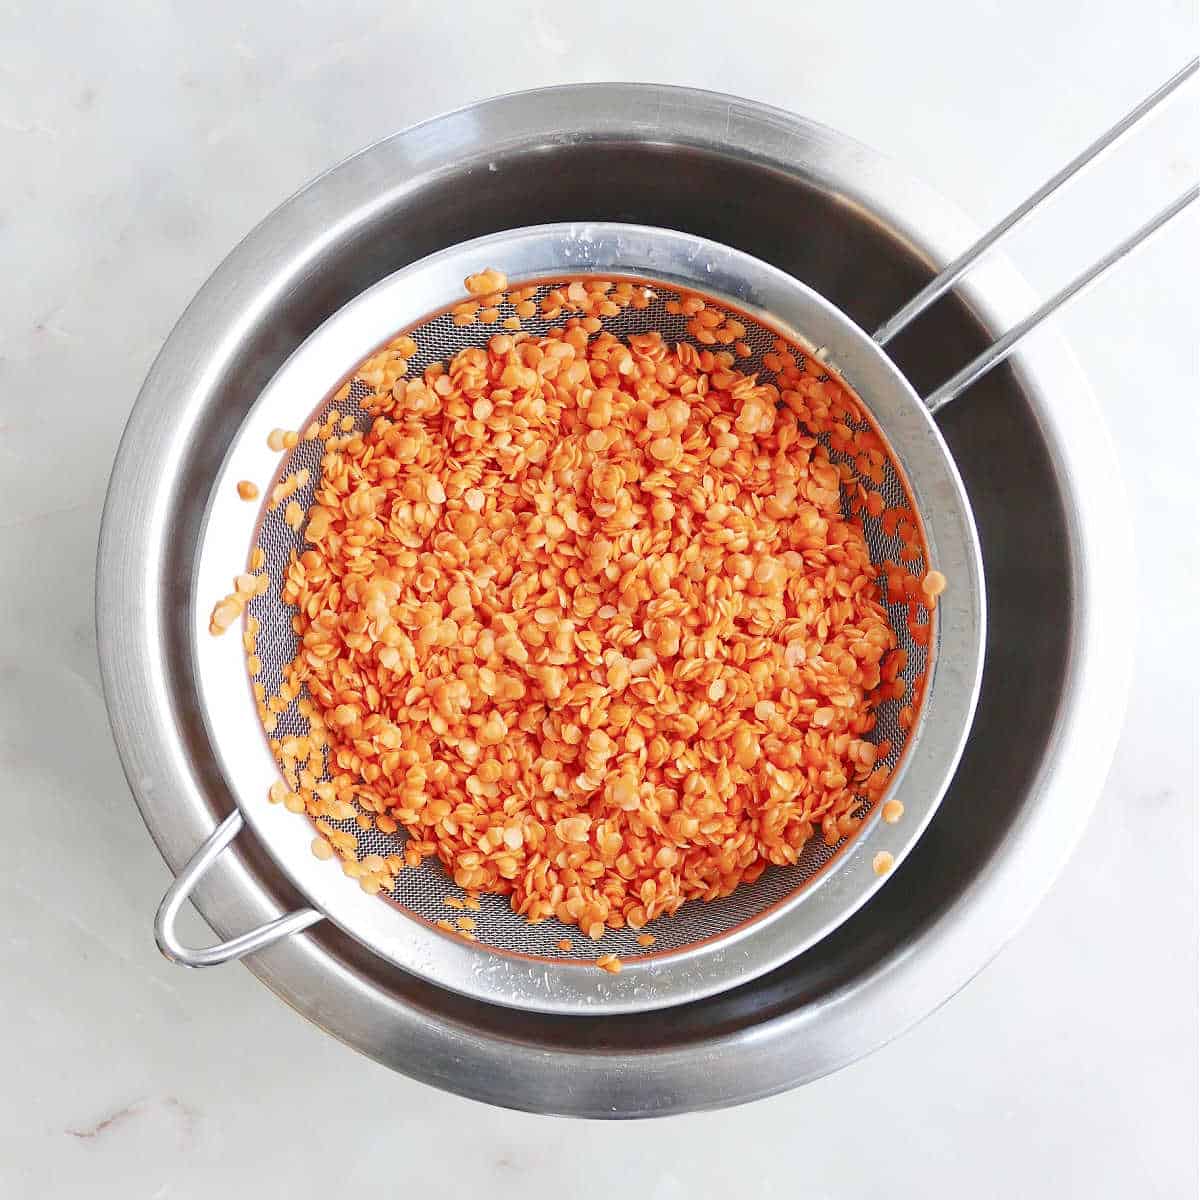 red split lentils draining after being rinsed over a bowl on a counter